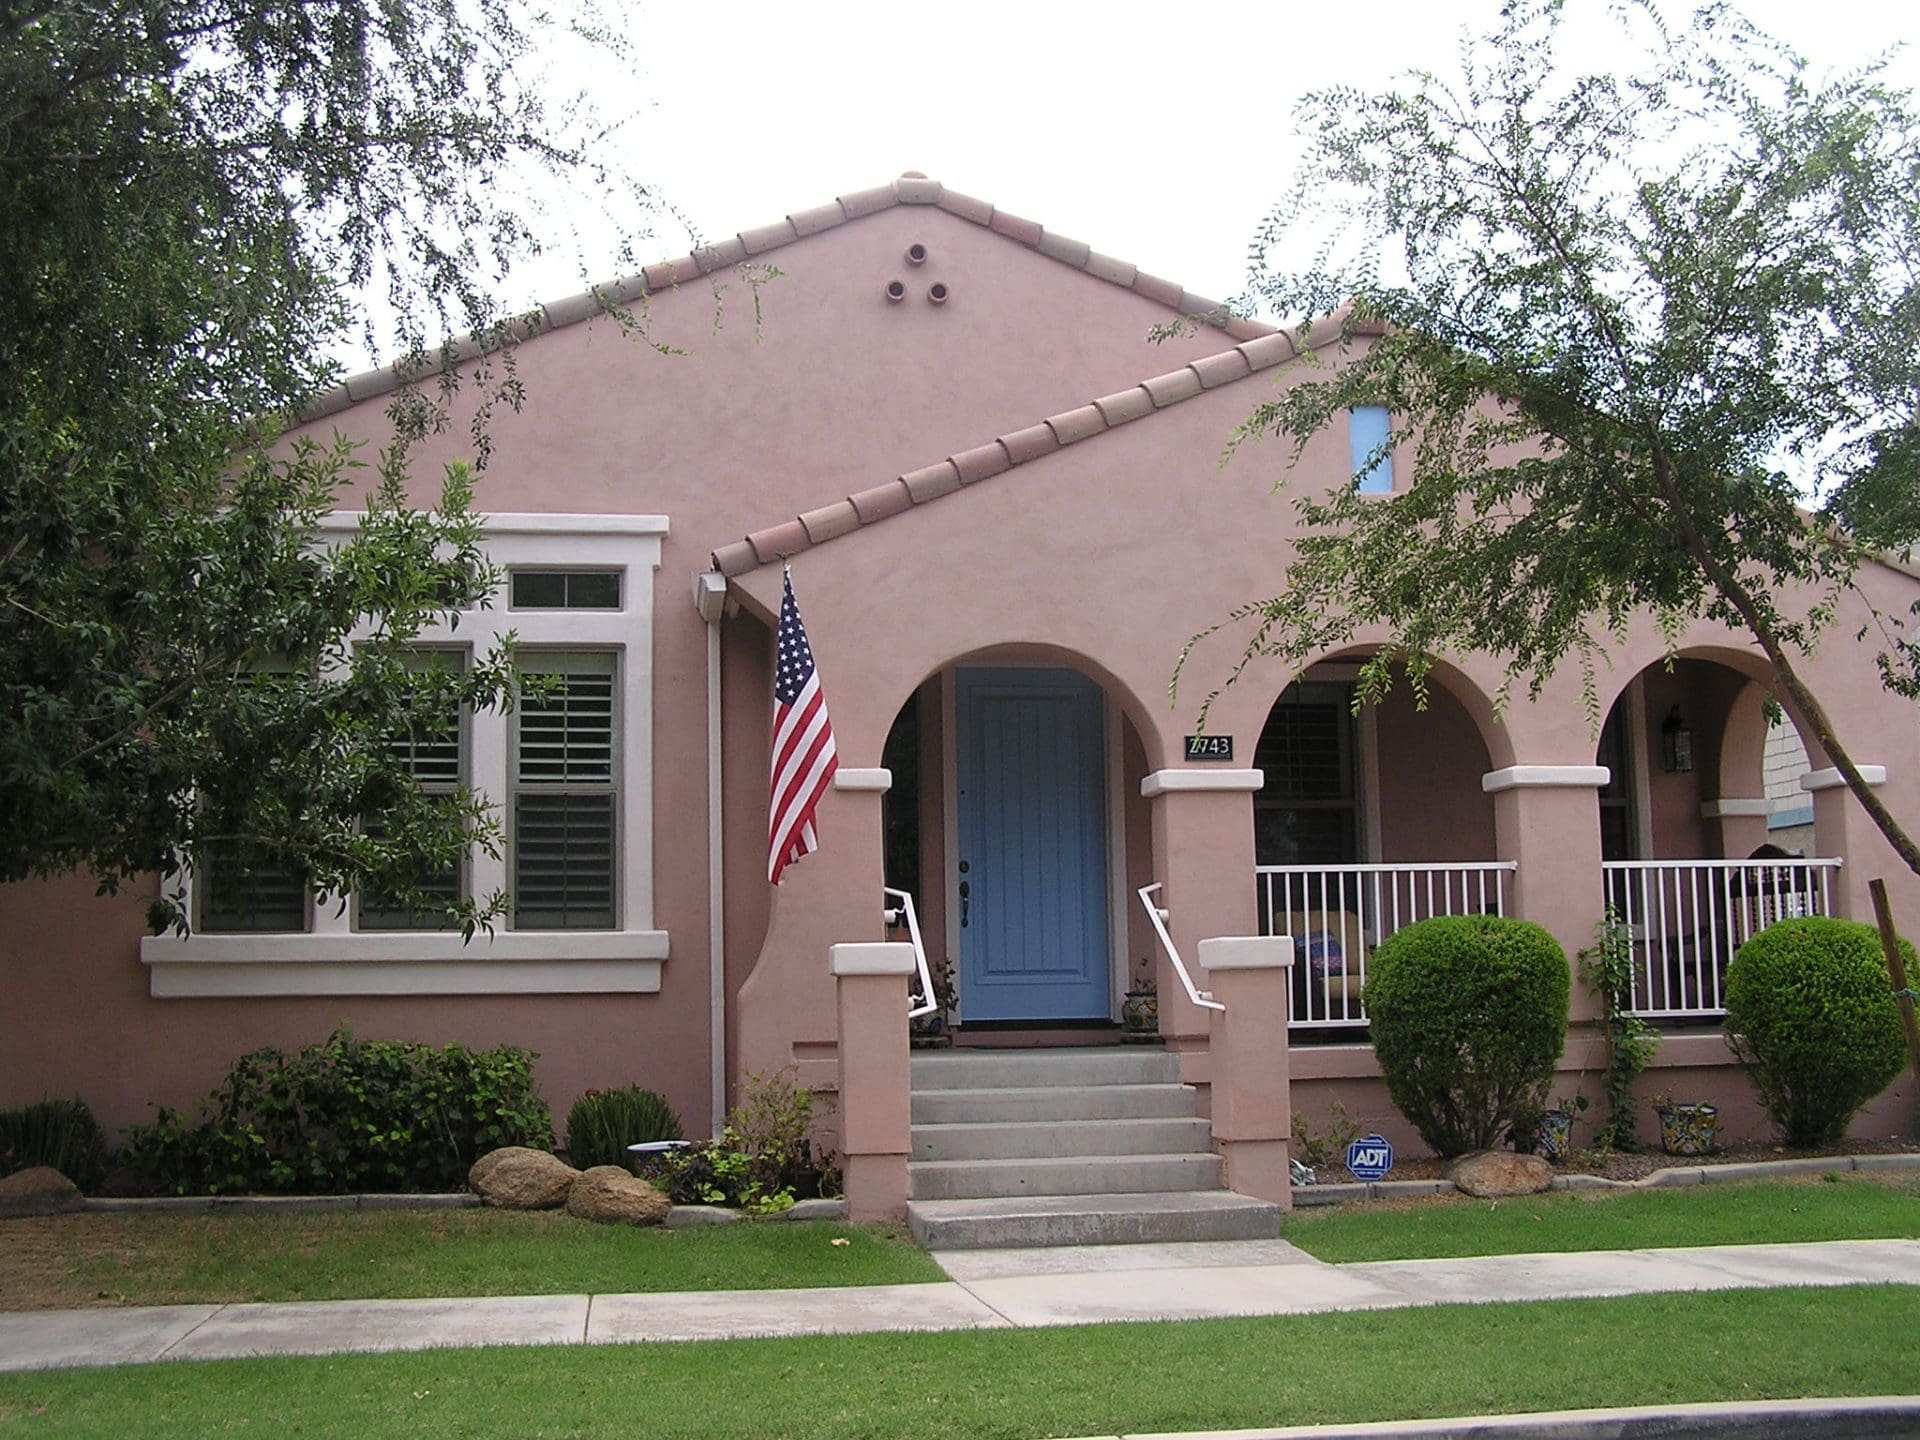 Residential exterior transformed by Arizona Painting Company: A newly painted brown home, displaying their expert craftsmanship and attention to detail.